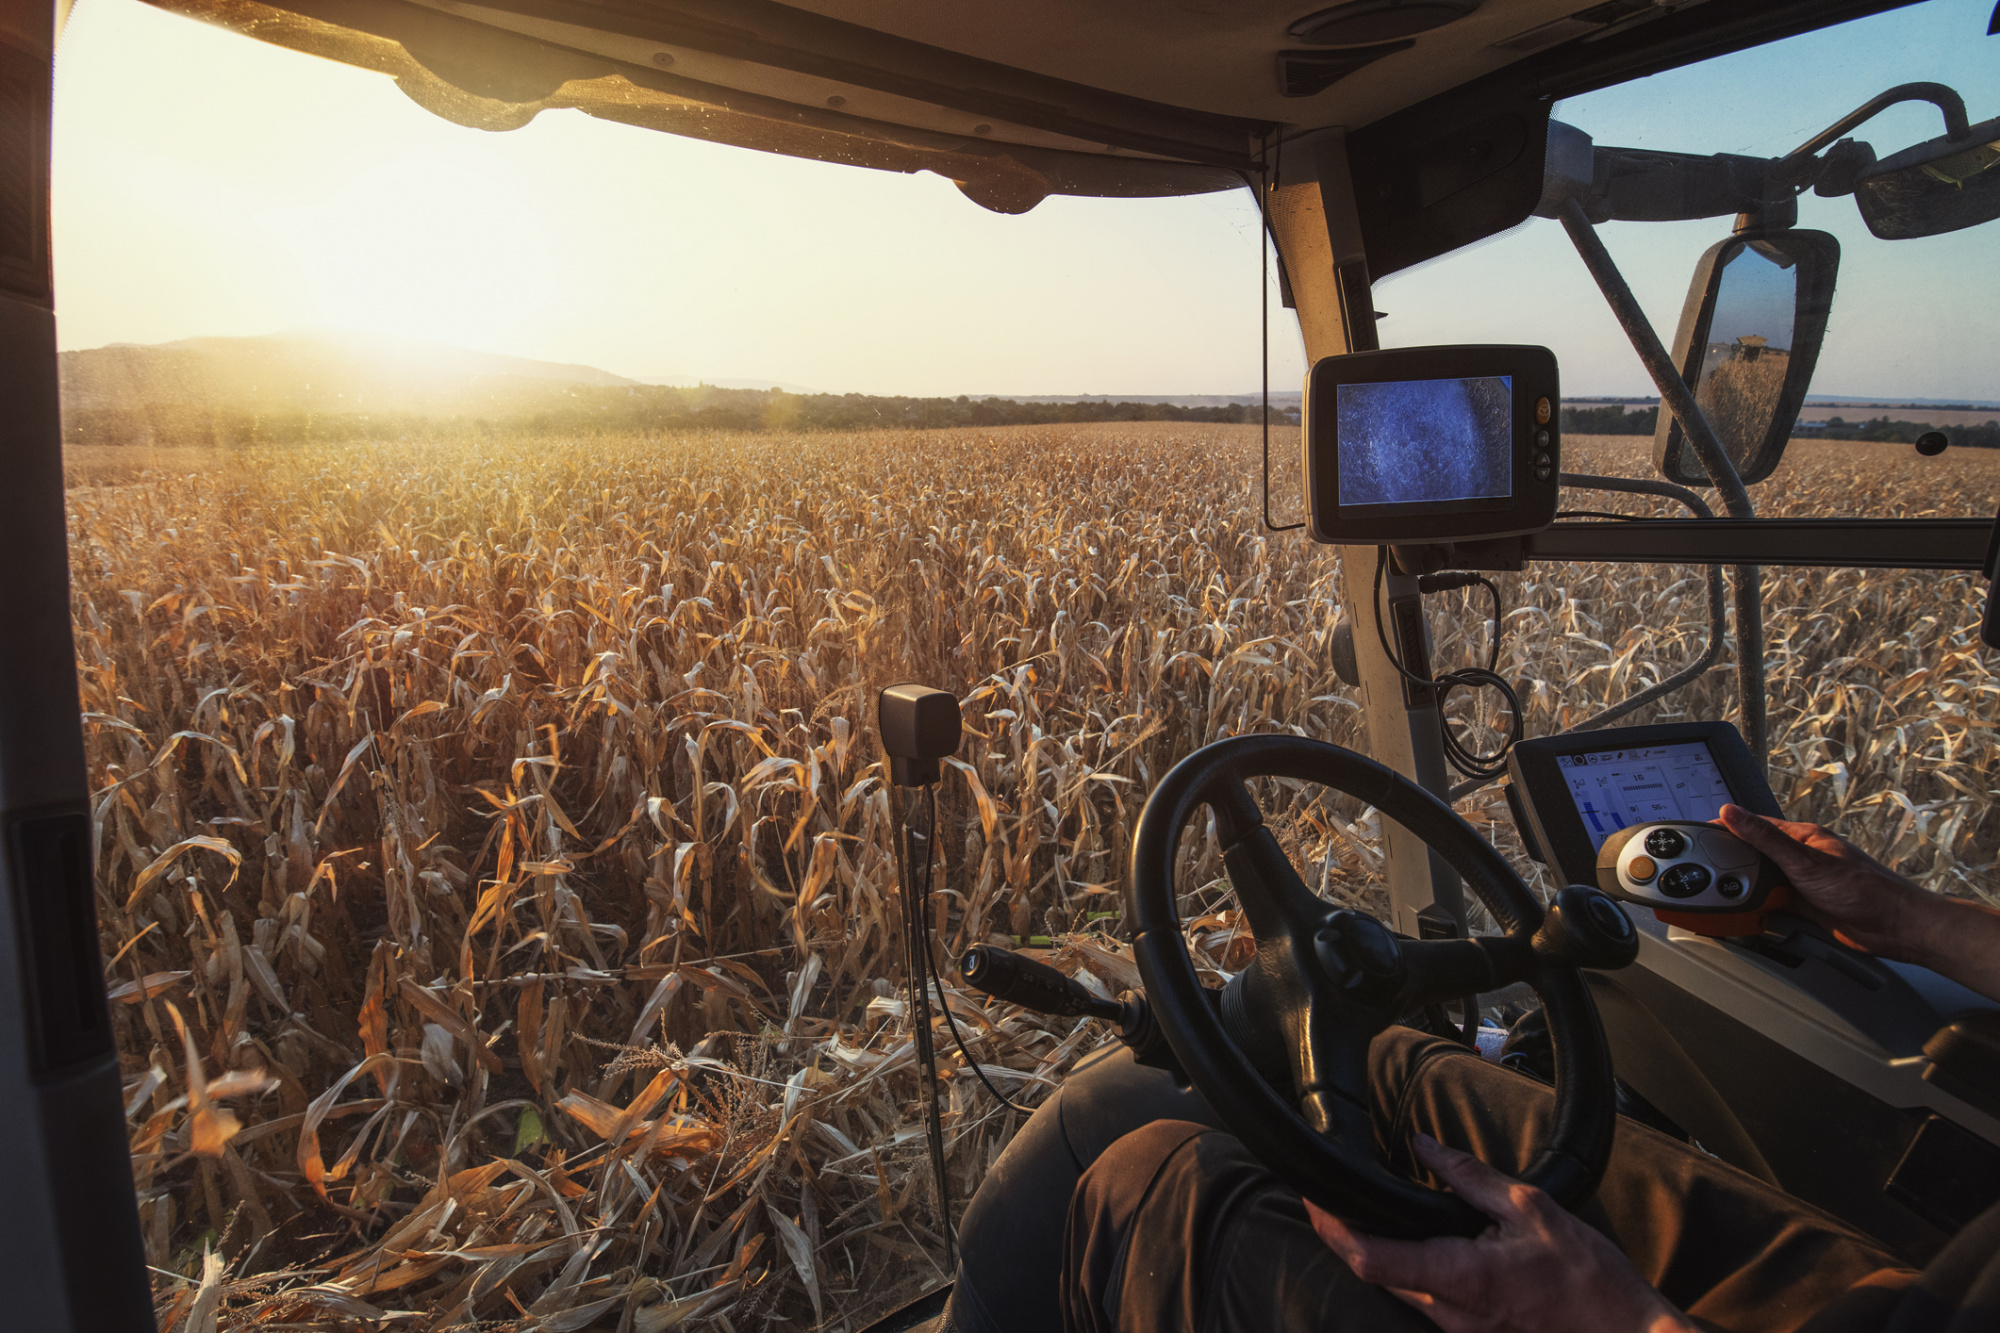 GPS controlled farming equipment in the agriculture industry